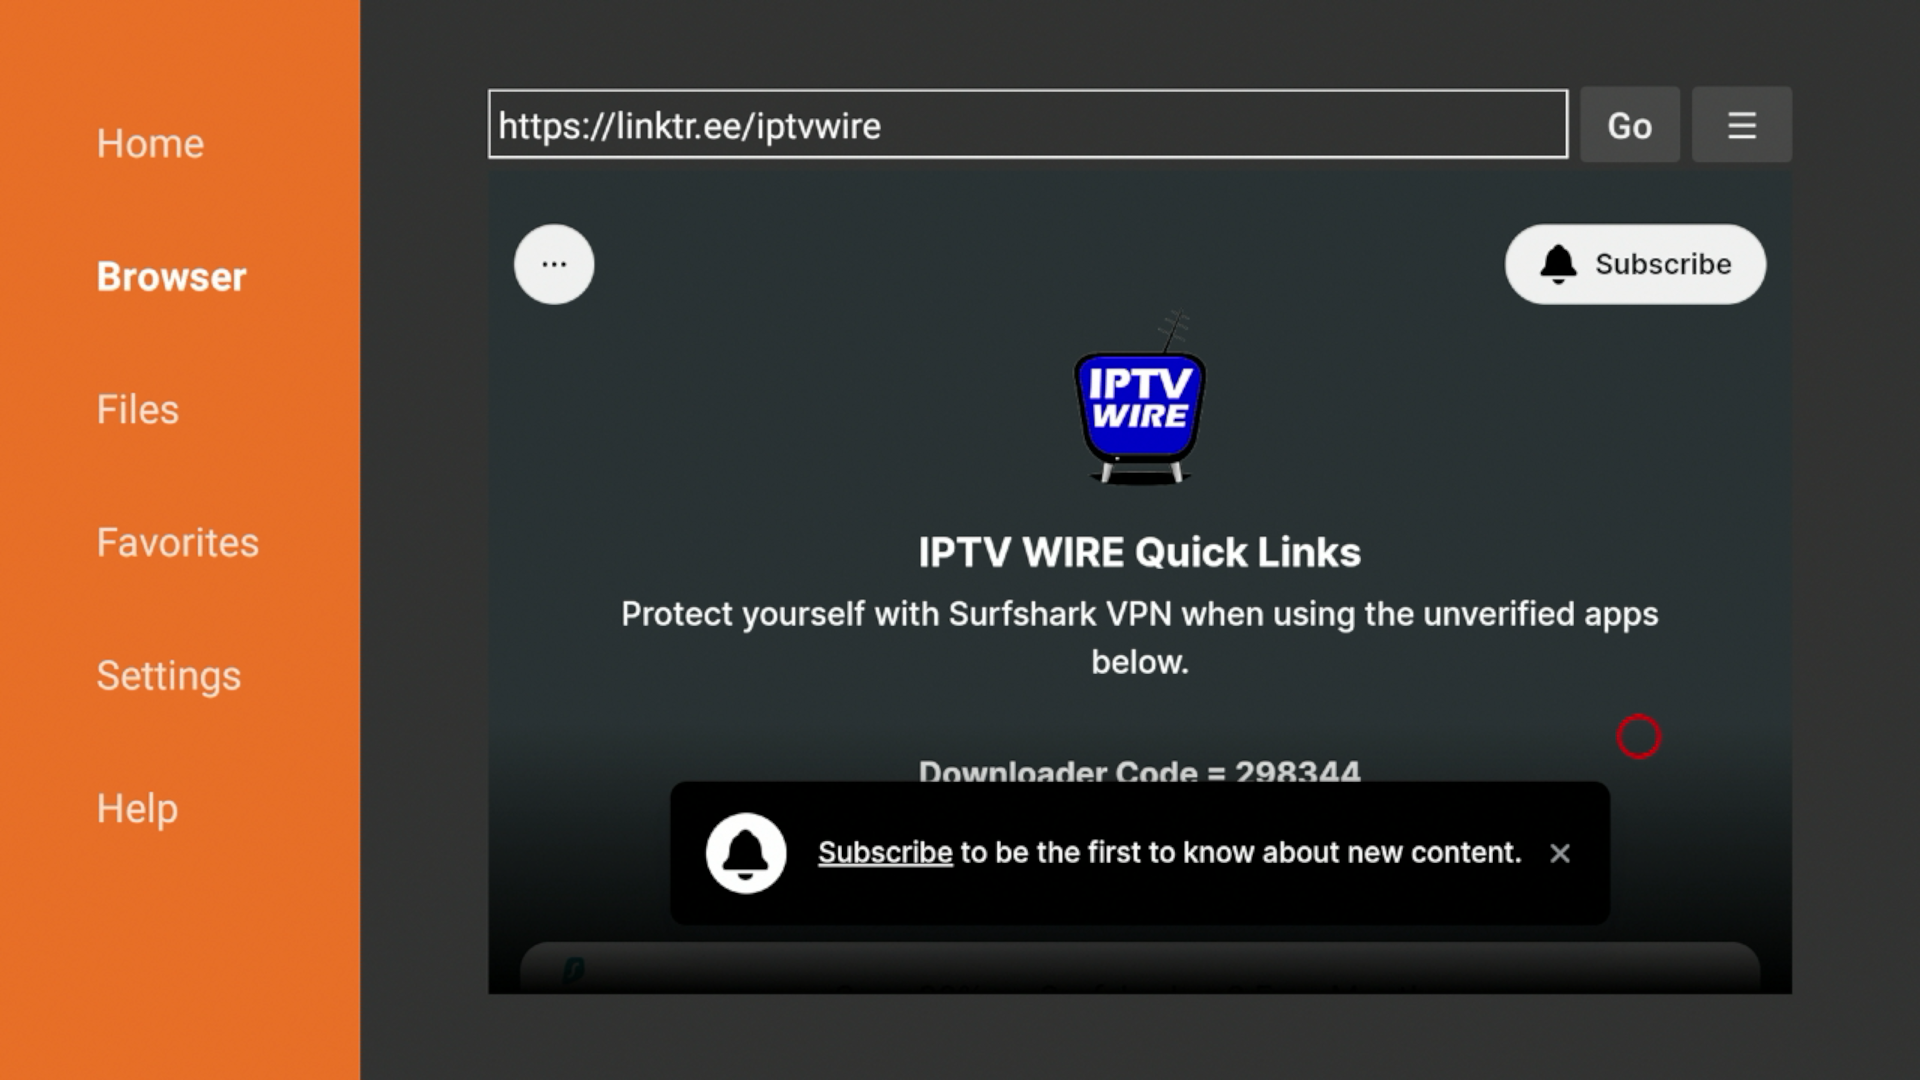 You are now on the IPTV Wire Quick Links page